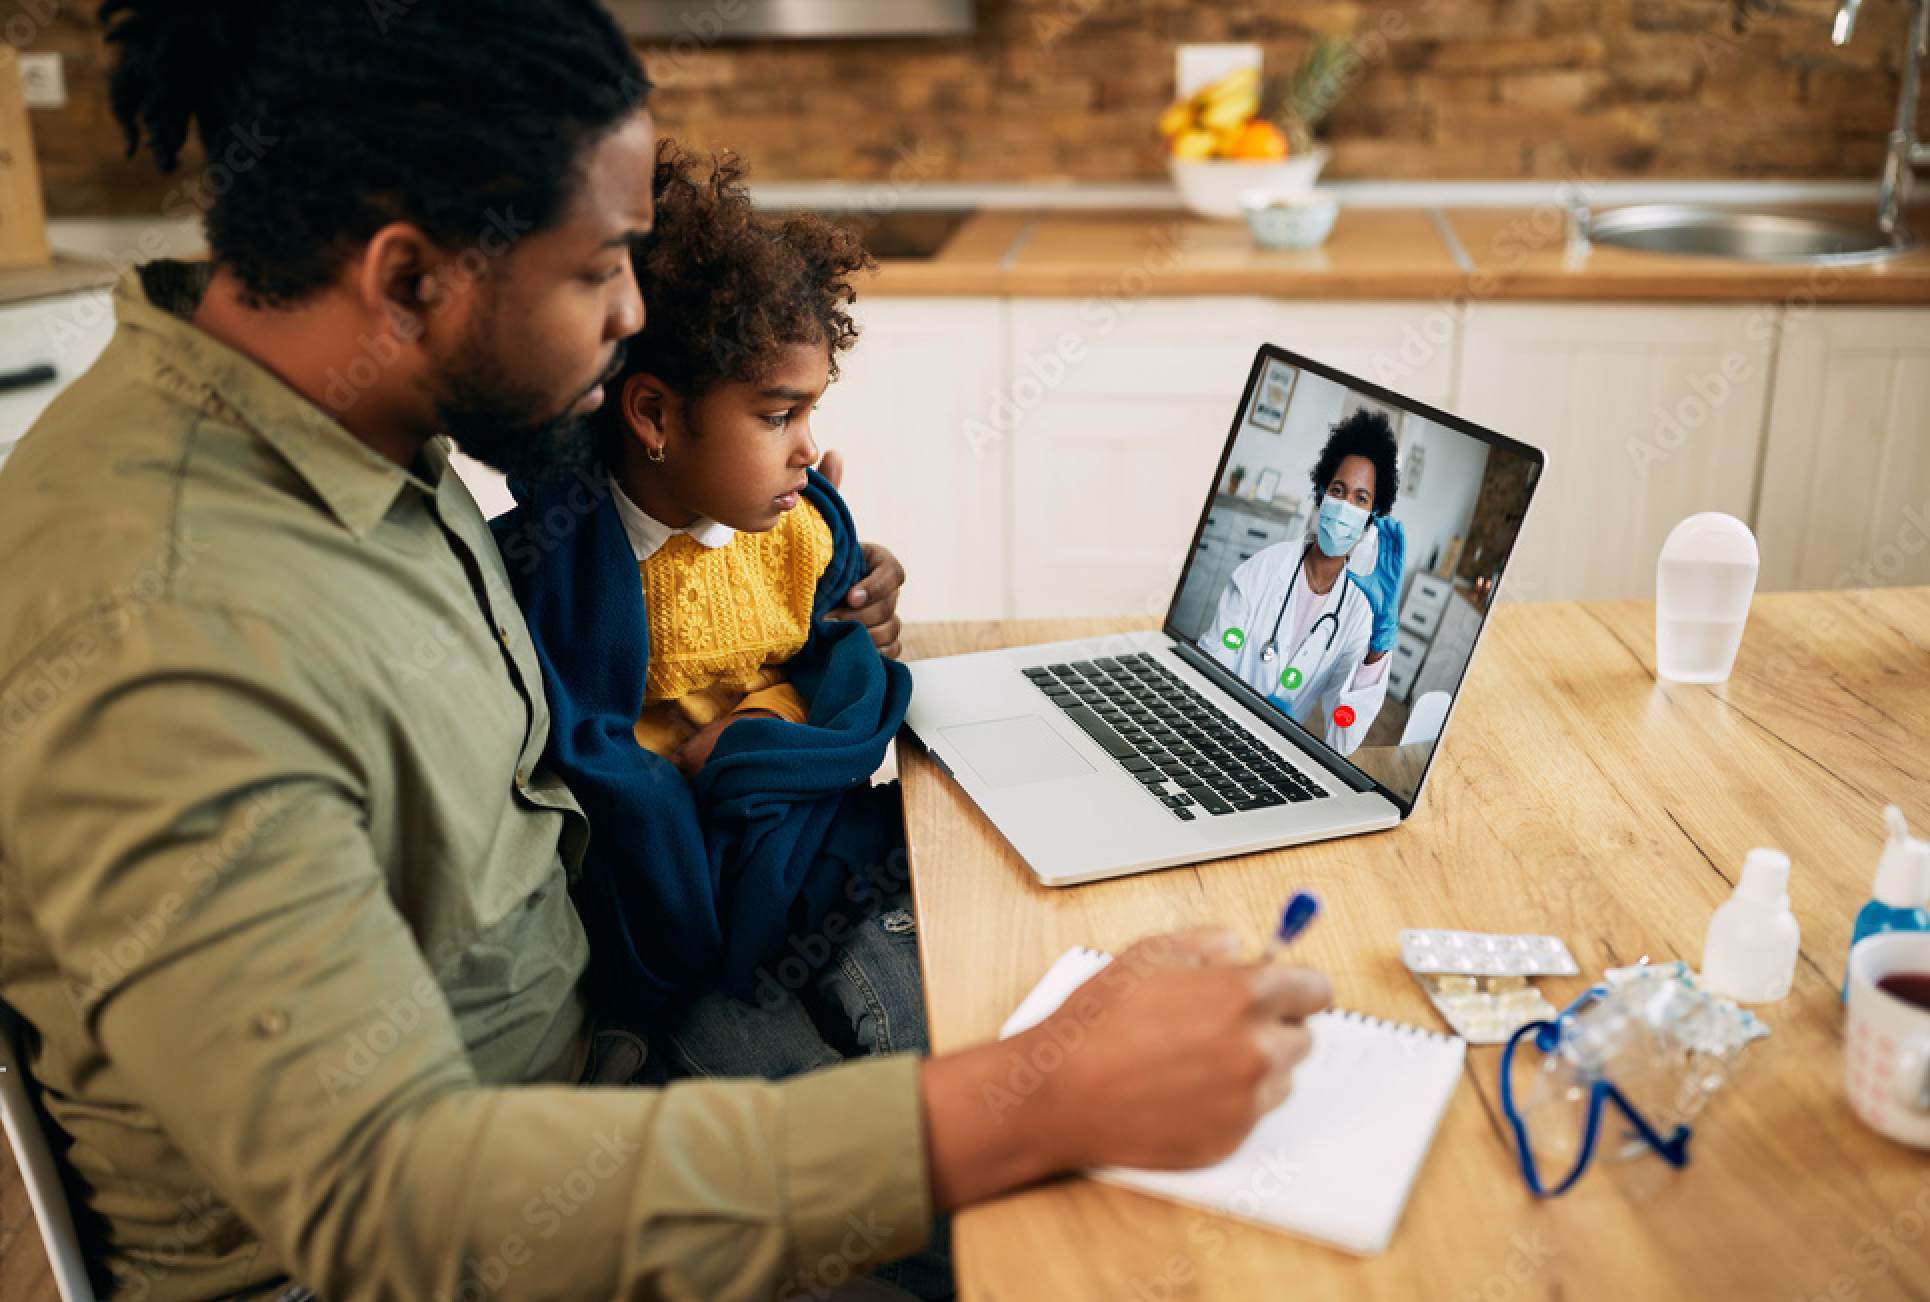 A study has found that telemedicine and the pandemic have had an impact on the continuity of pediatric ophthalmic visits. 